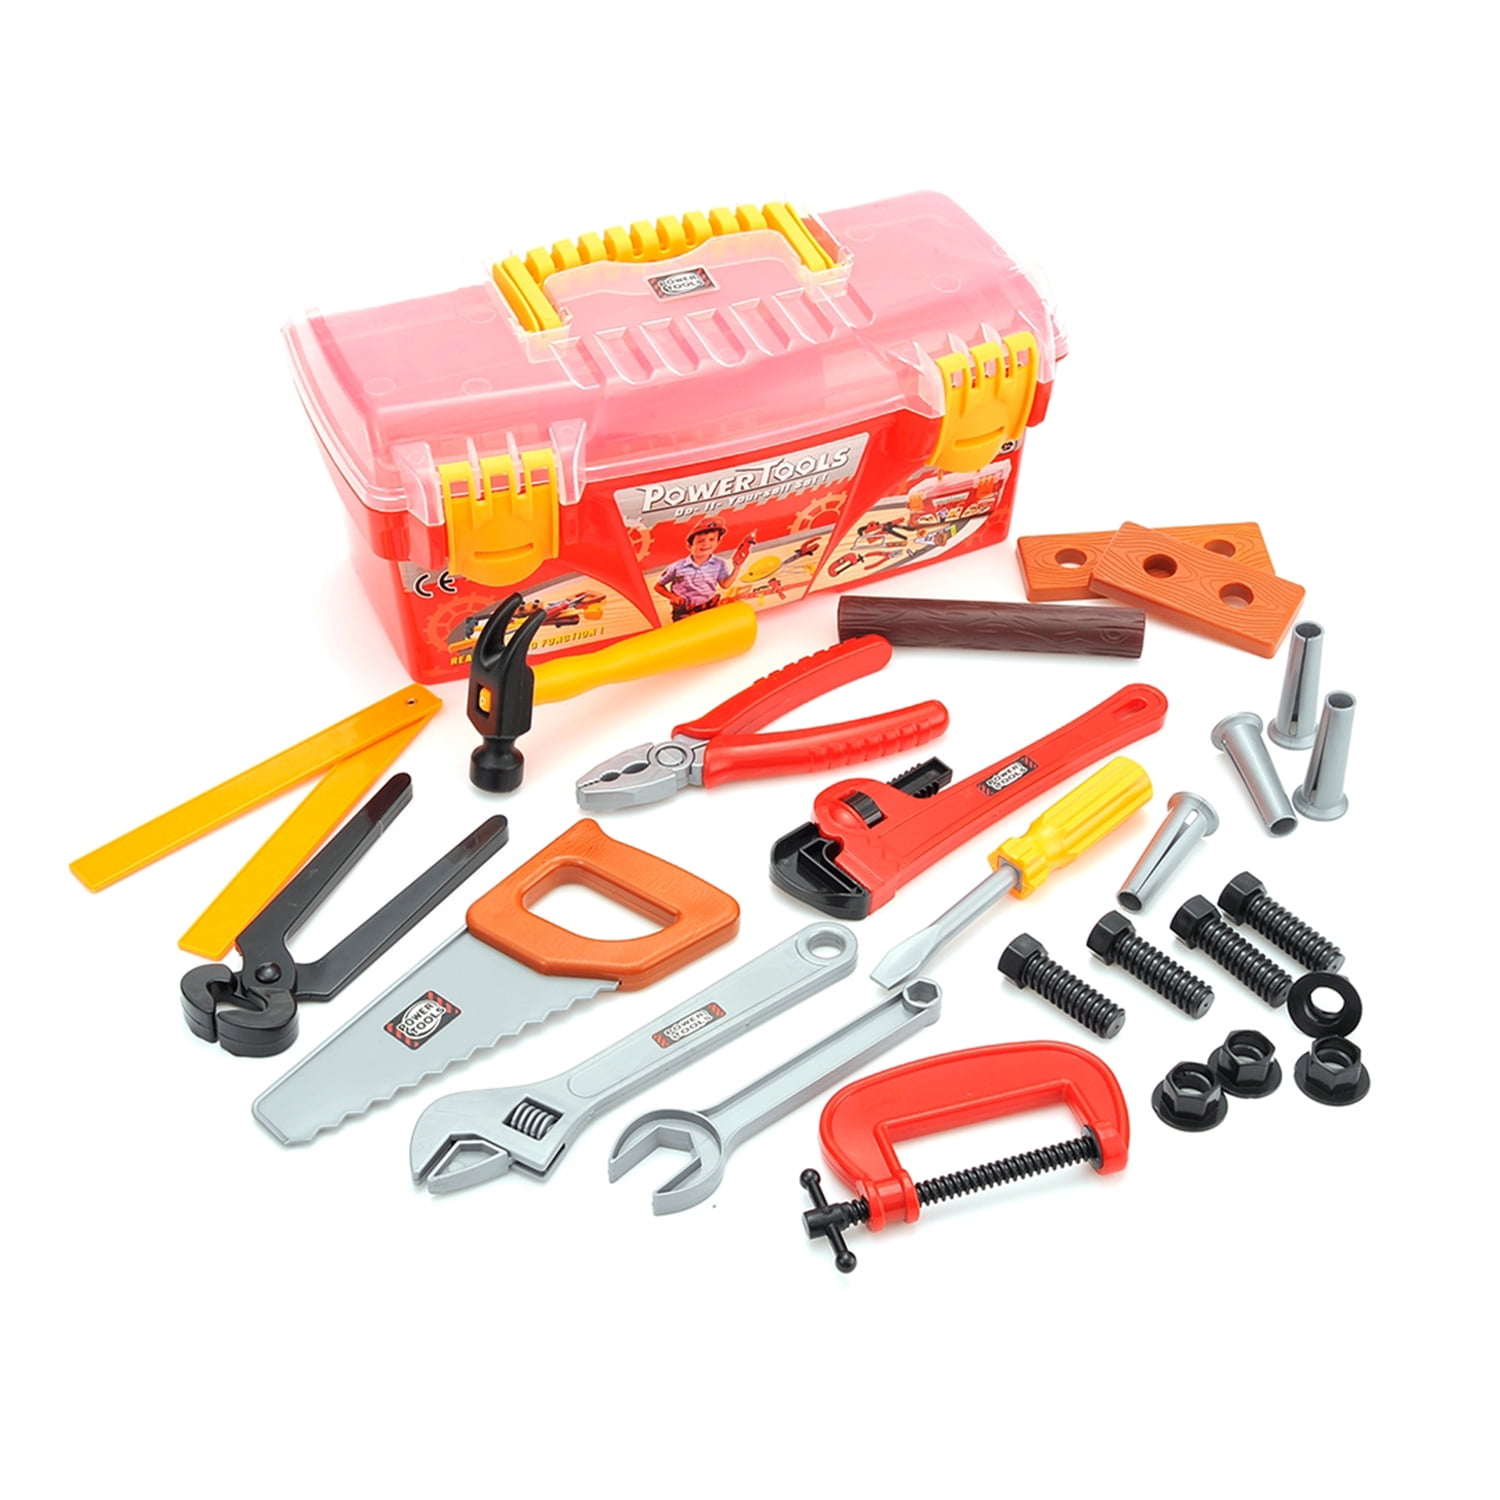 26-piece Tool Box Set with Removable Tool Tray Great Gift Toy for Boys